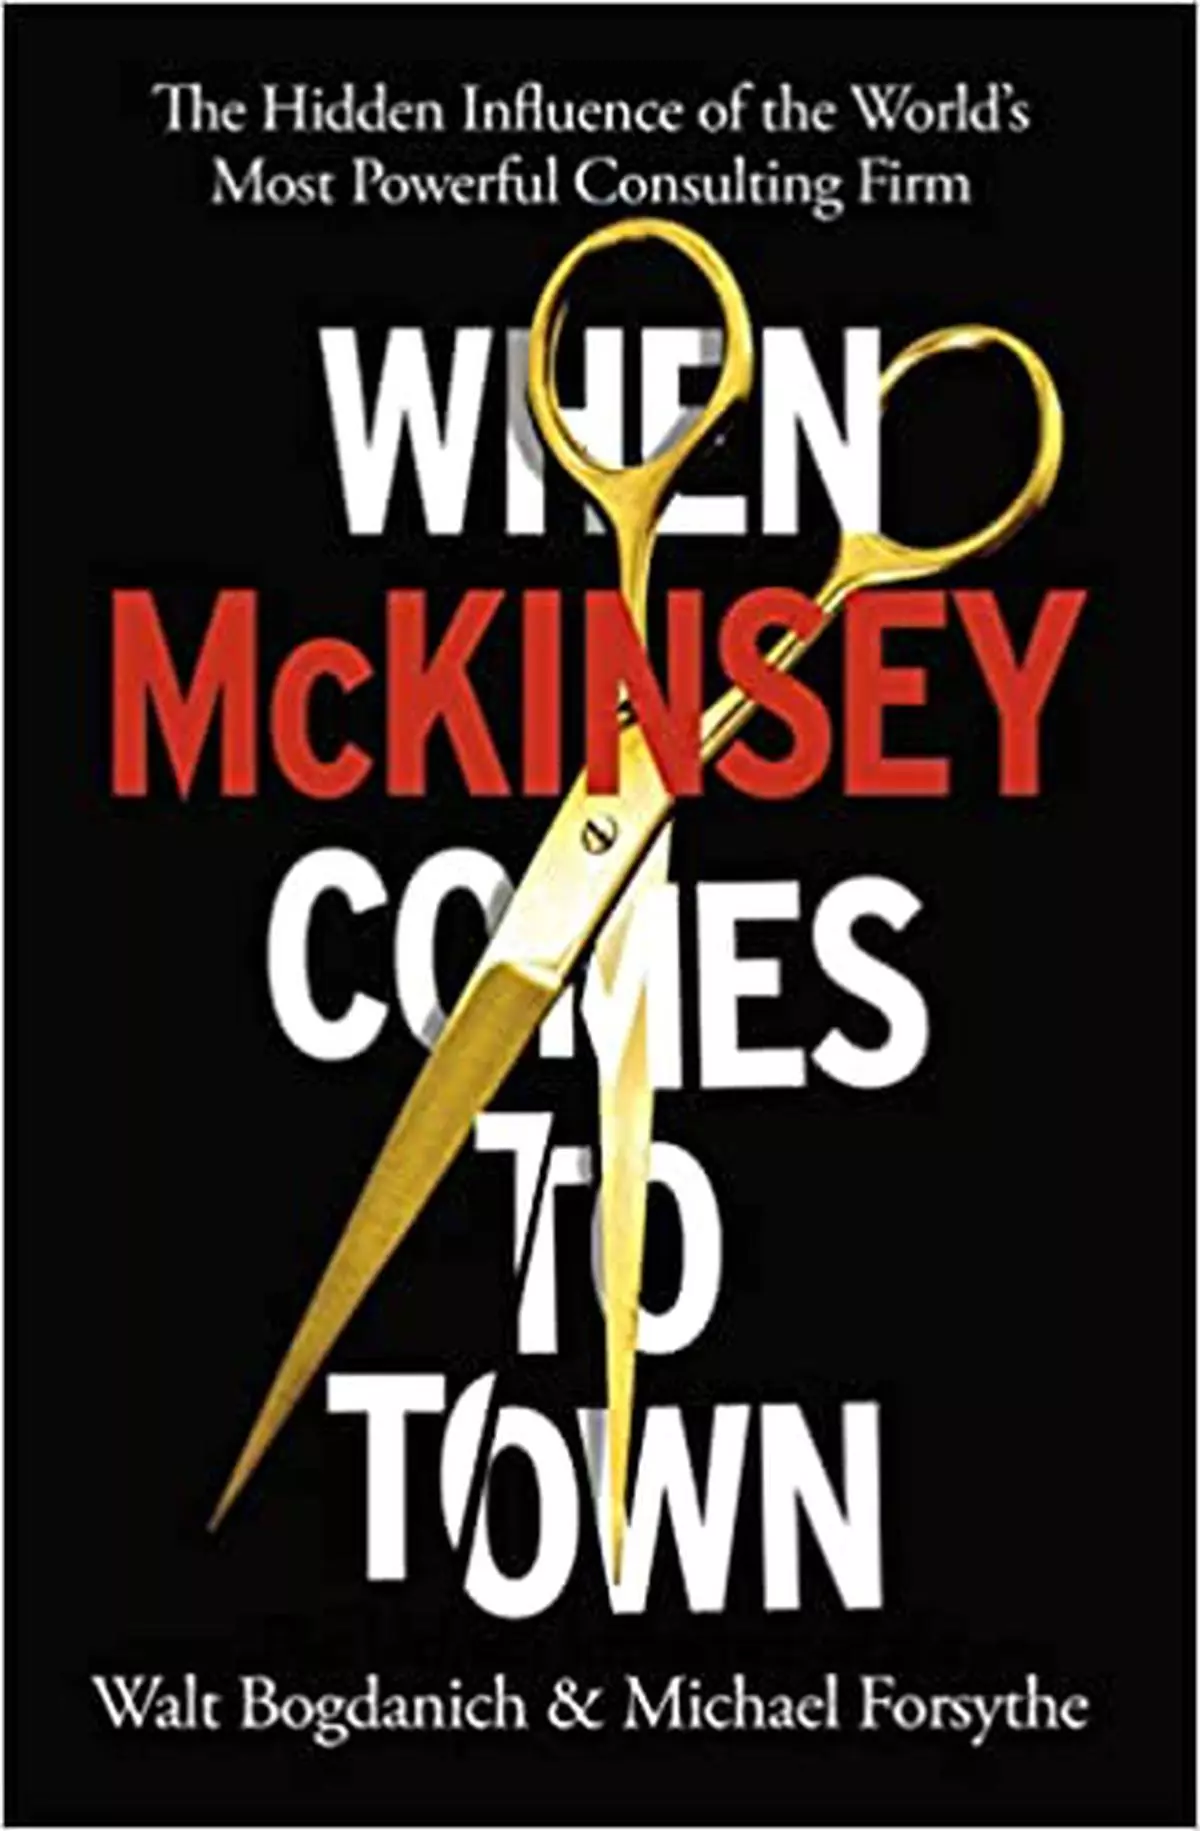 When McKinsey Comes to Town: The Hidden Influence of the World’s Most Powerful Consulting Firm 